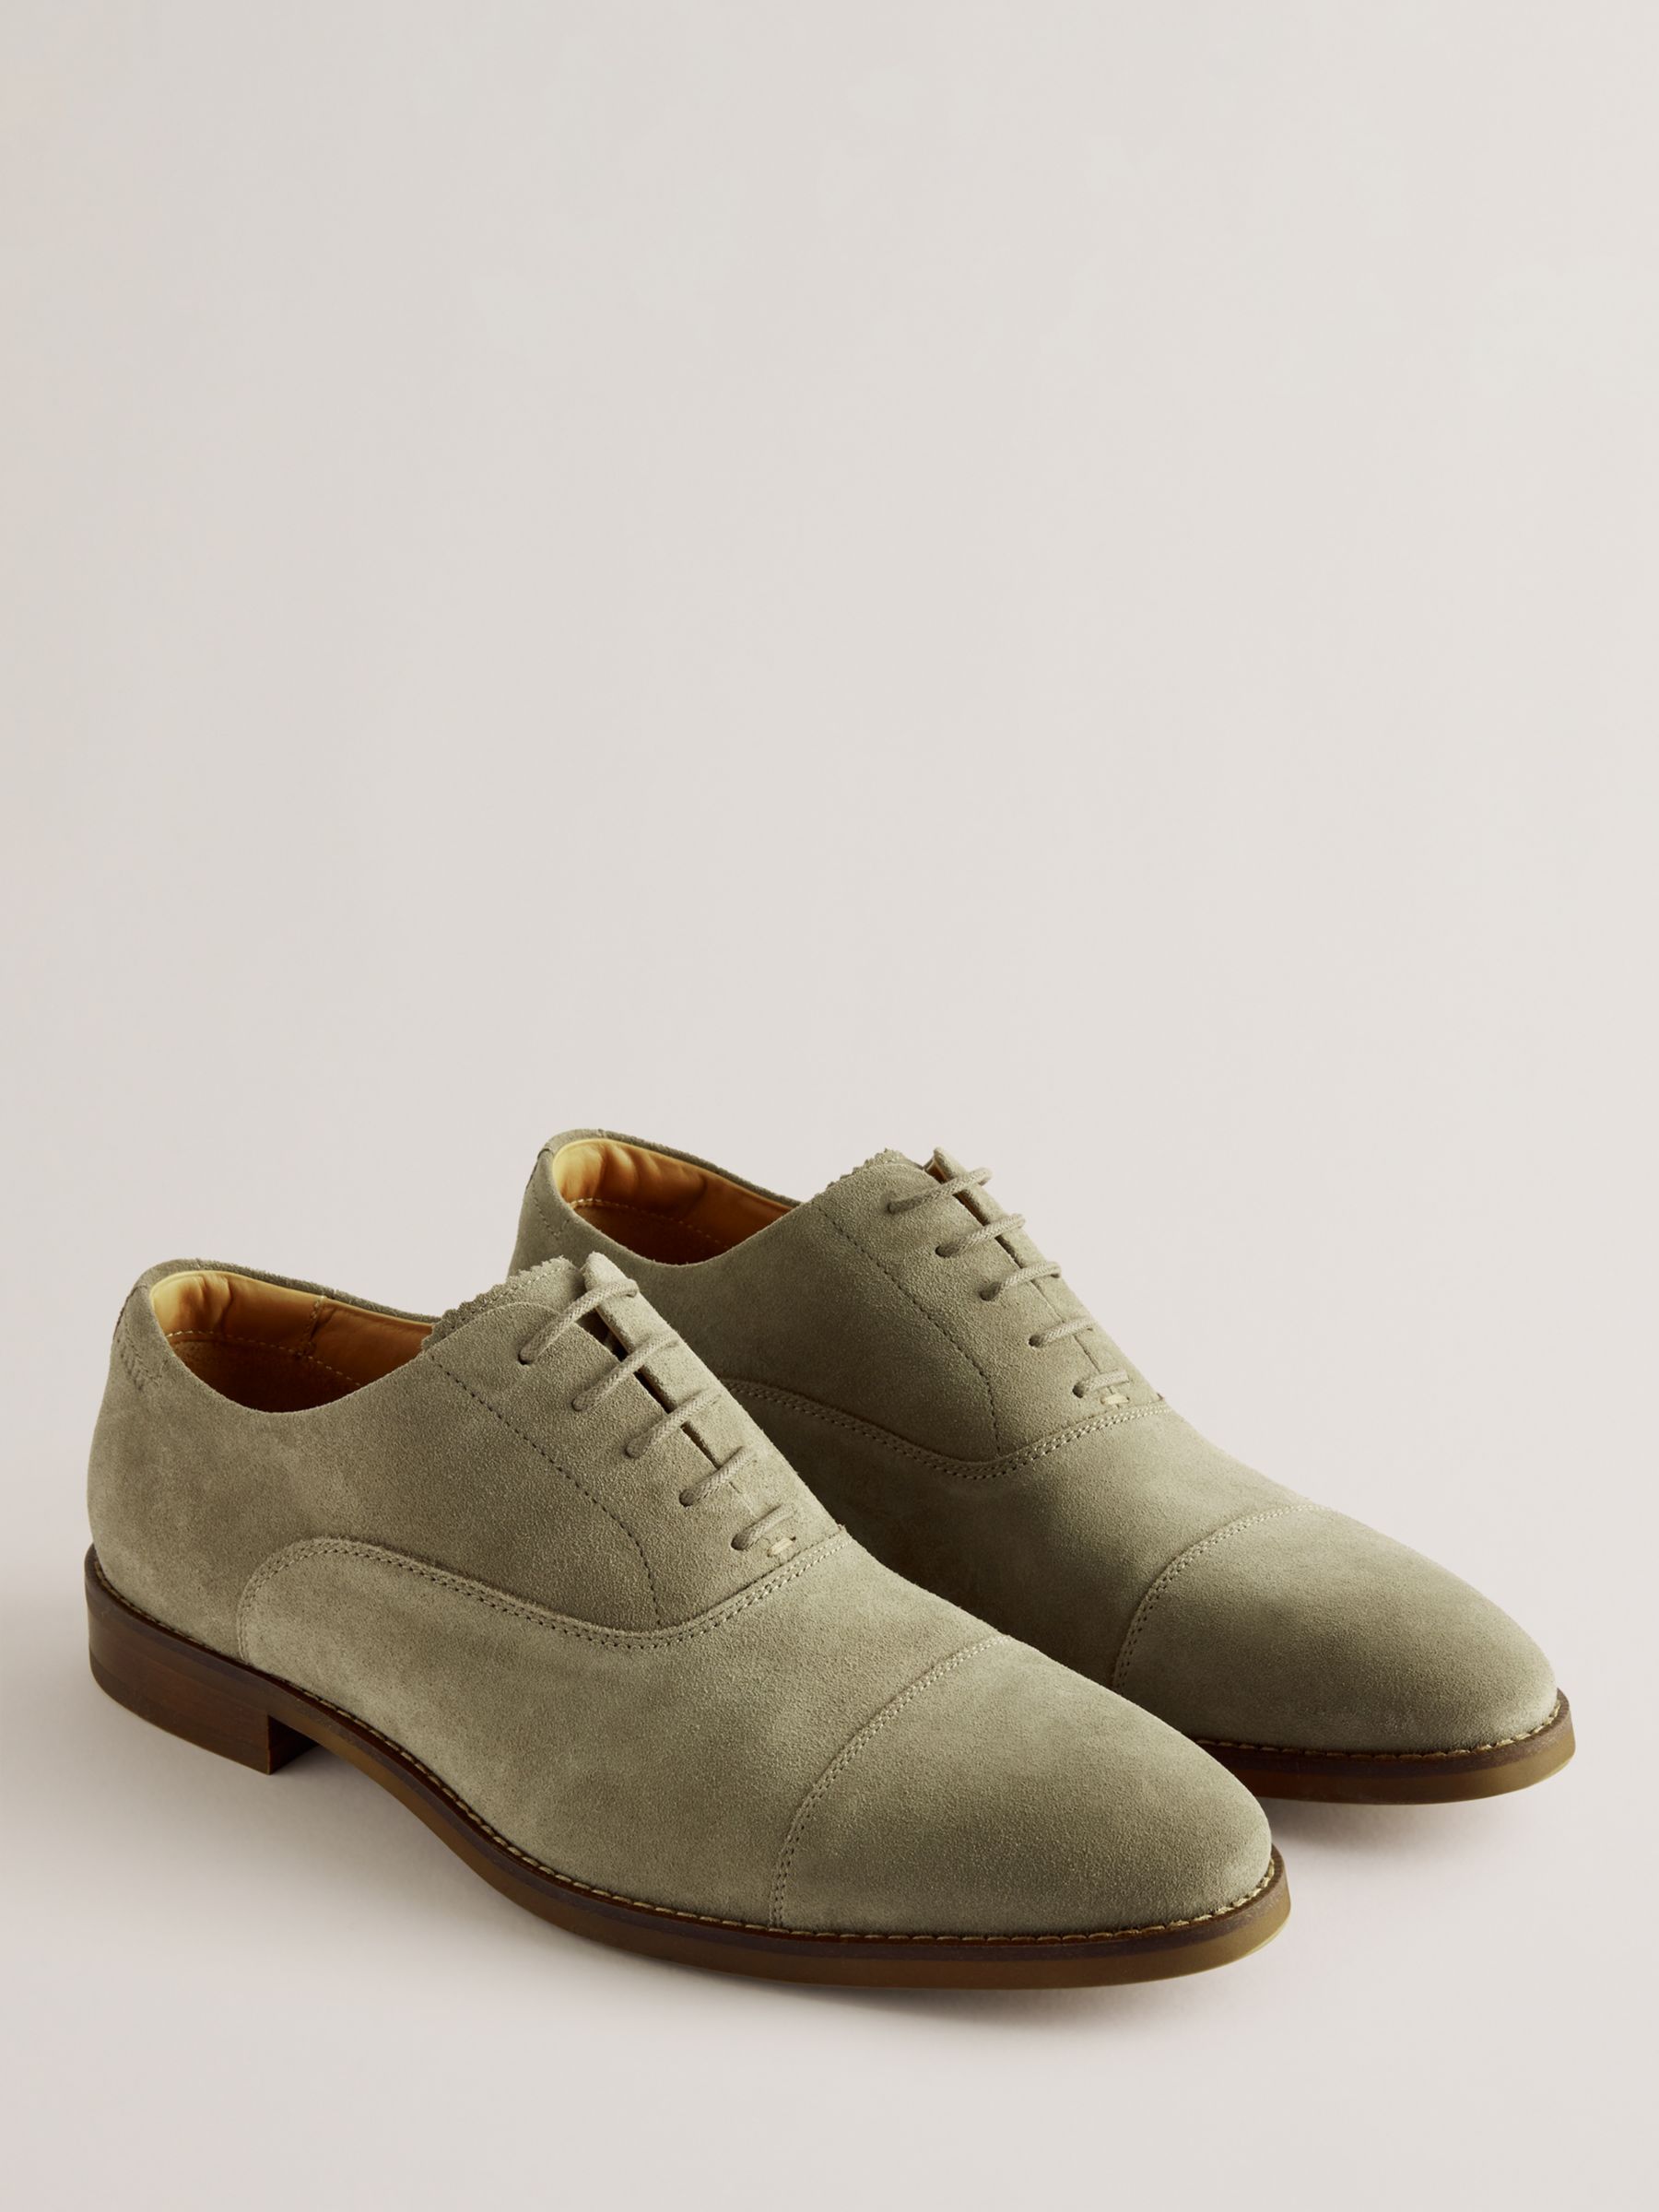 Buy Ted Baker Oxfoord Suede Oxford Shoes, Khaki Online at johnlewis.com